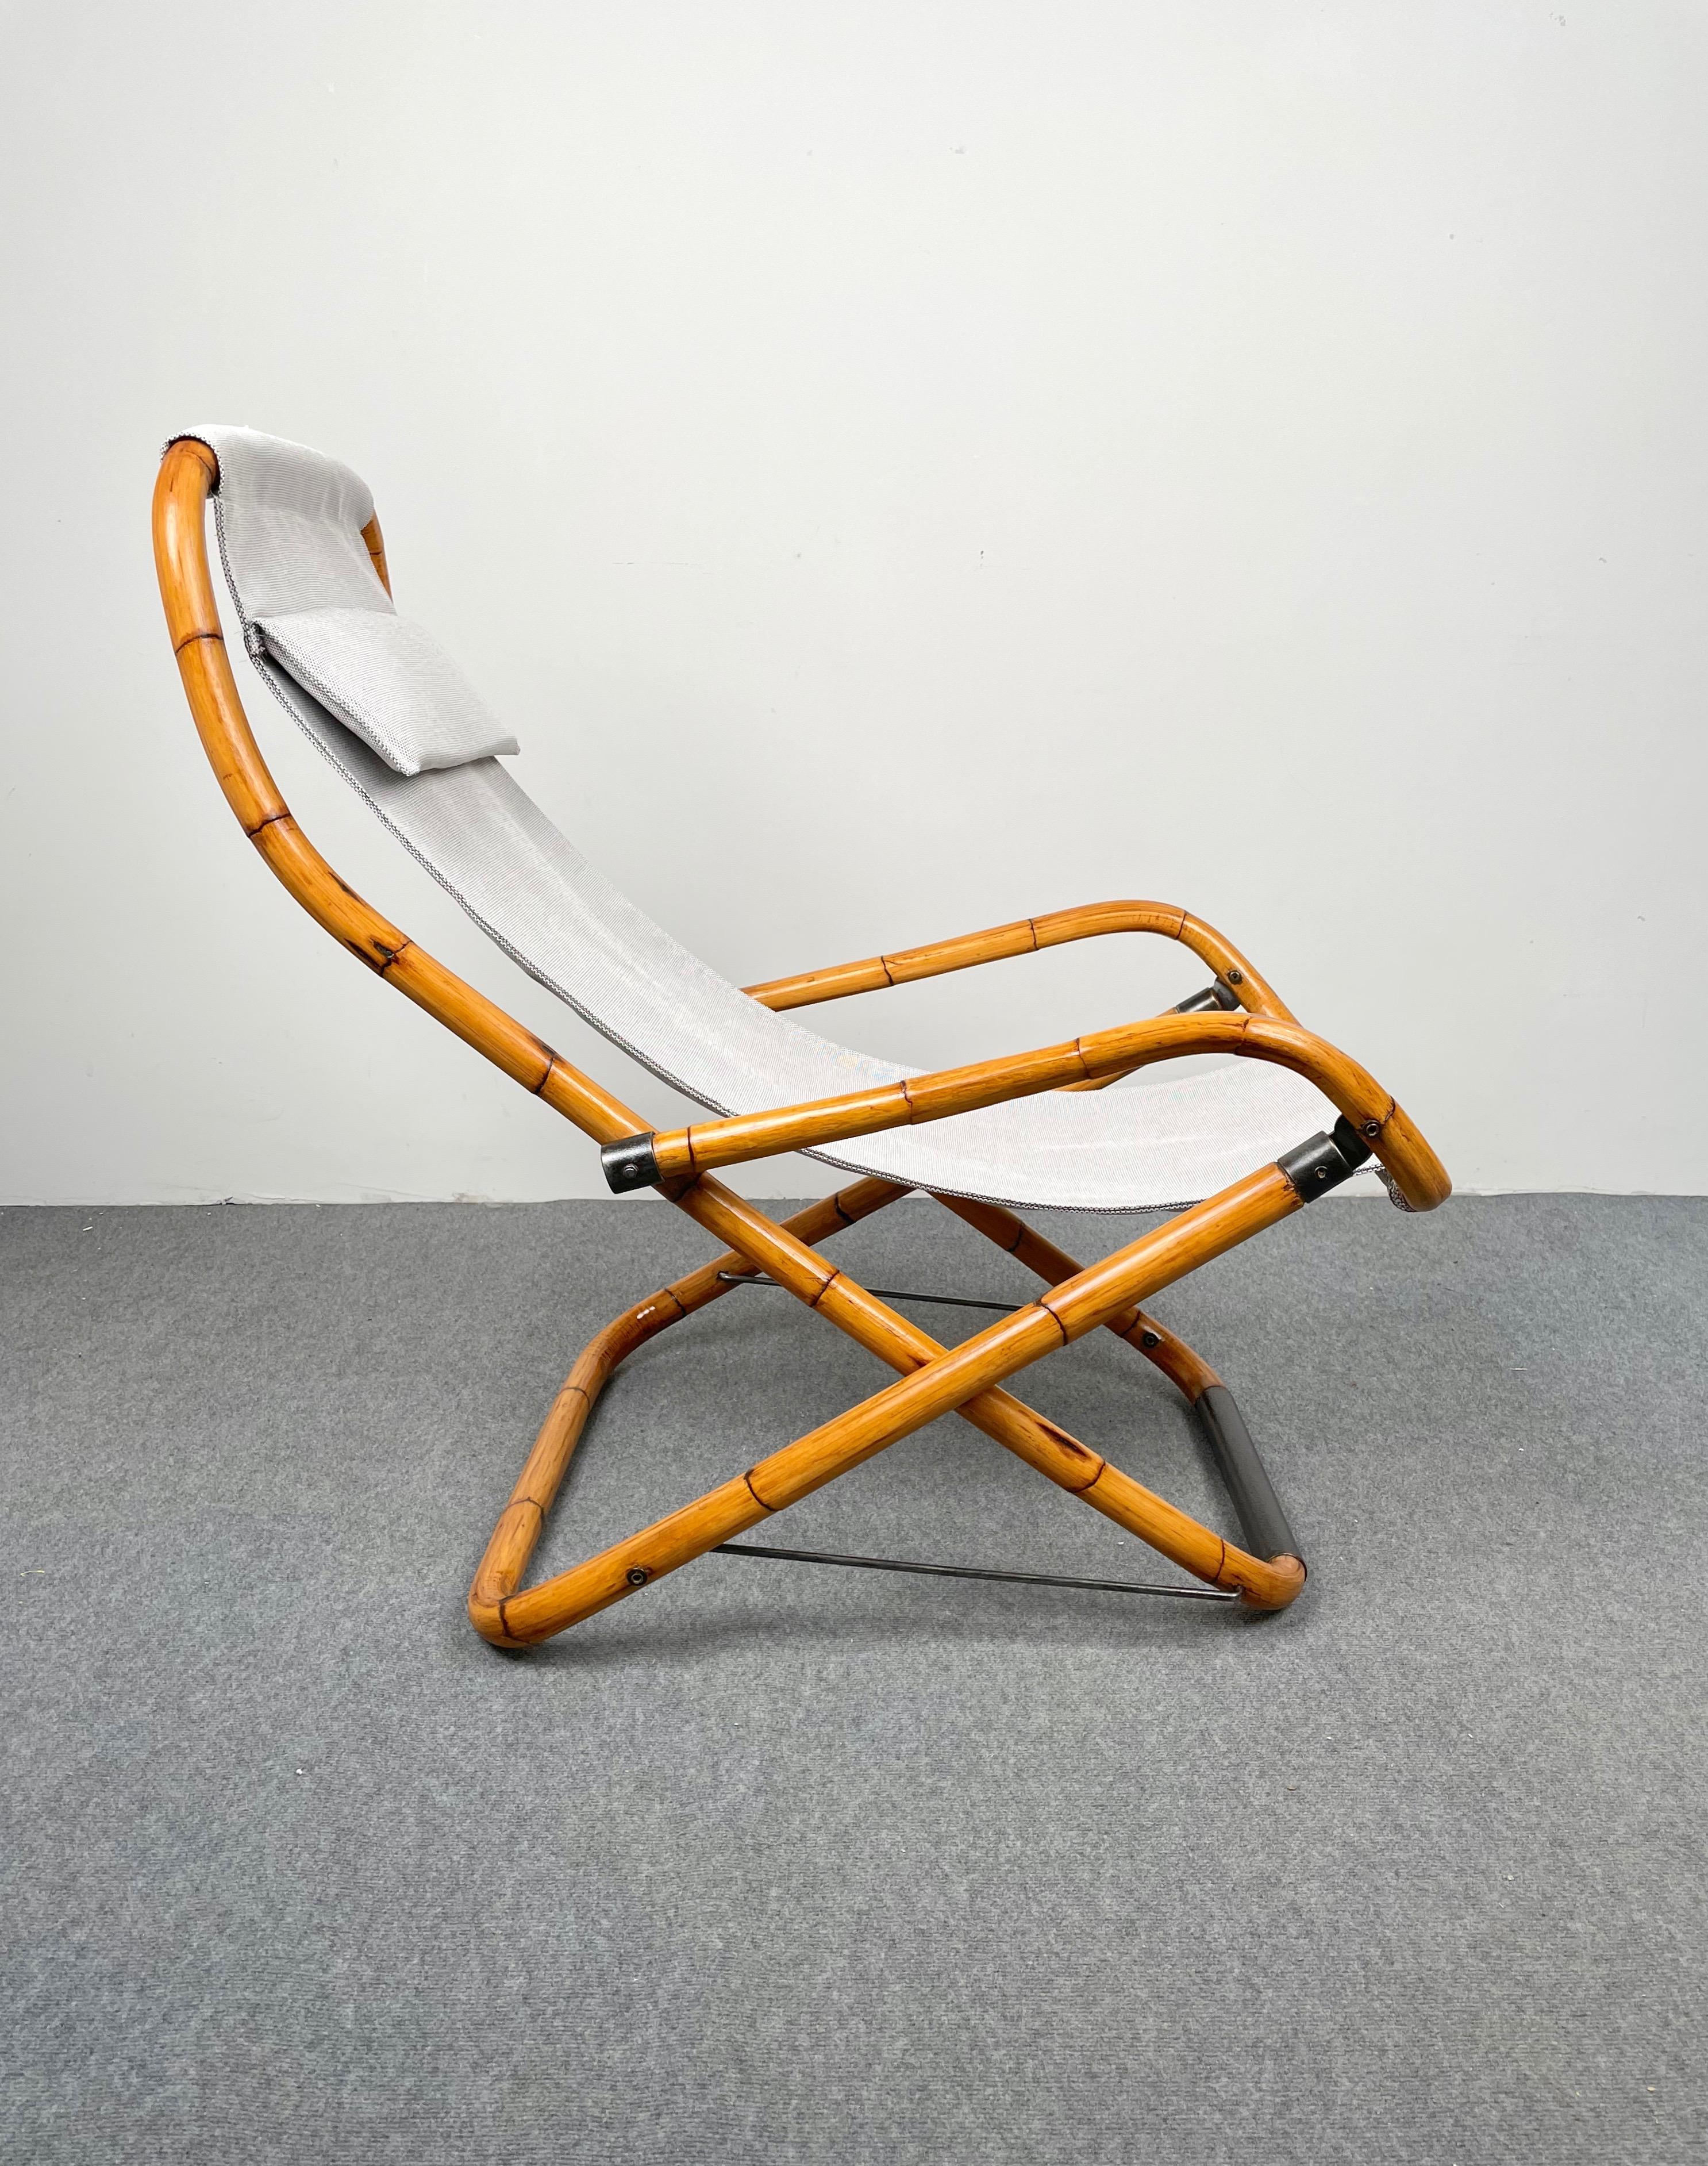 Metal Pair of Bamboo, Iron and Fabric Folding Lounge Deck Chair, Italy, 1960s For Sale